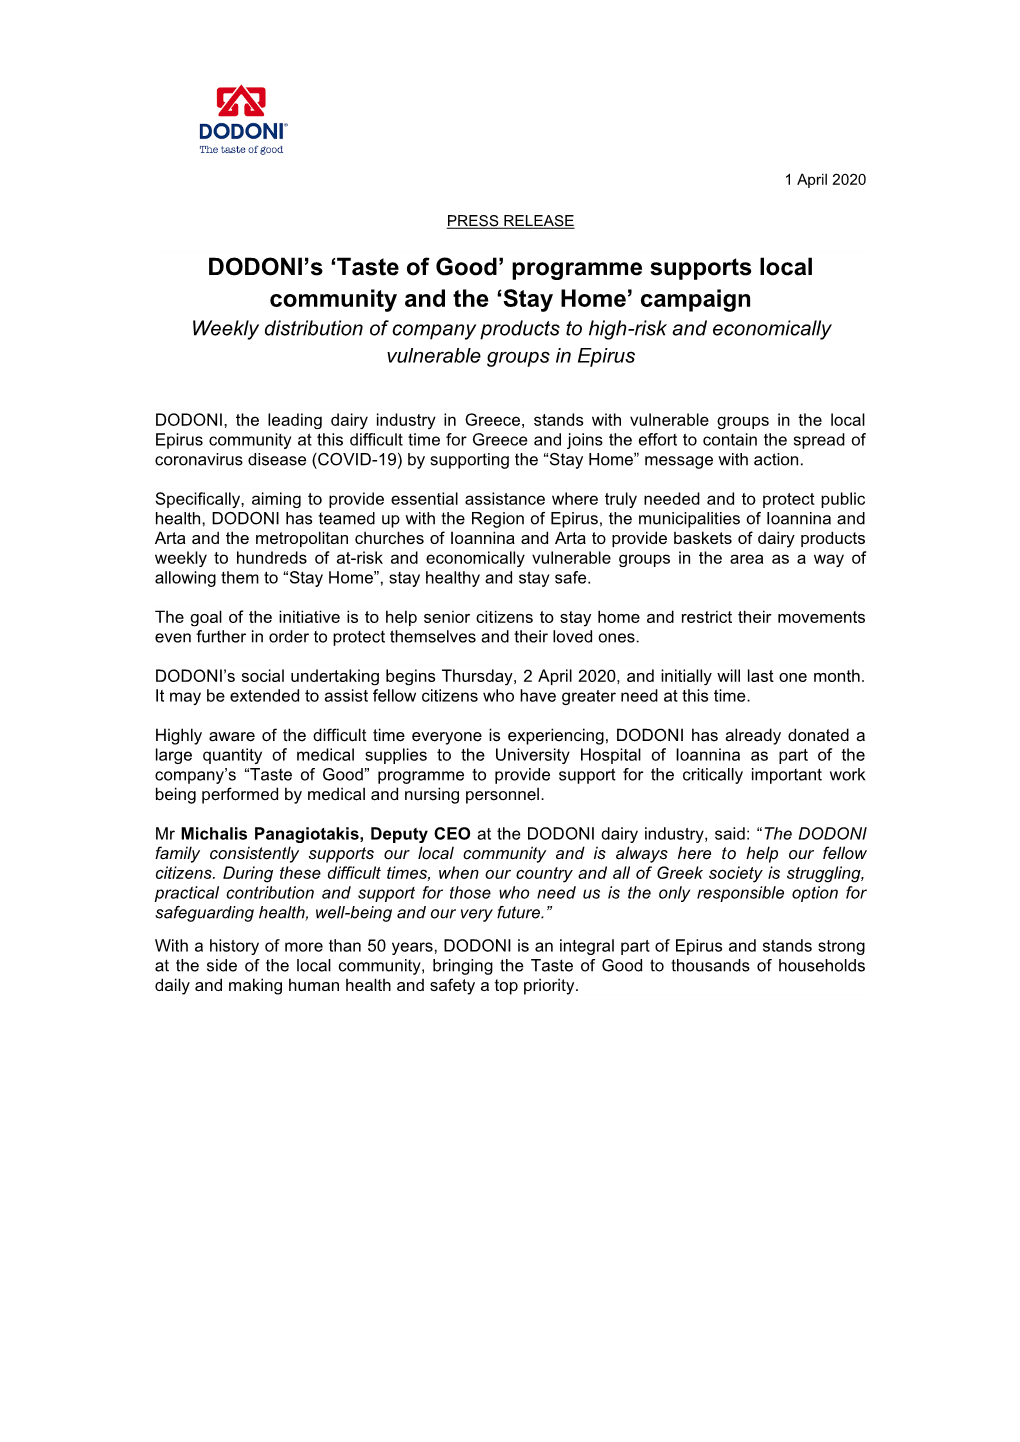 DODONI's 'Taste of Good' Programme Supports Local Community and The